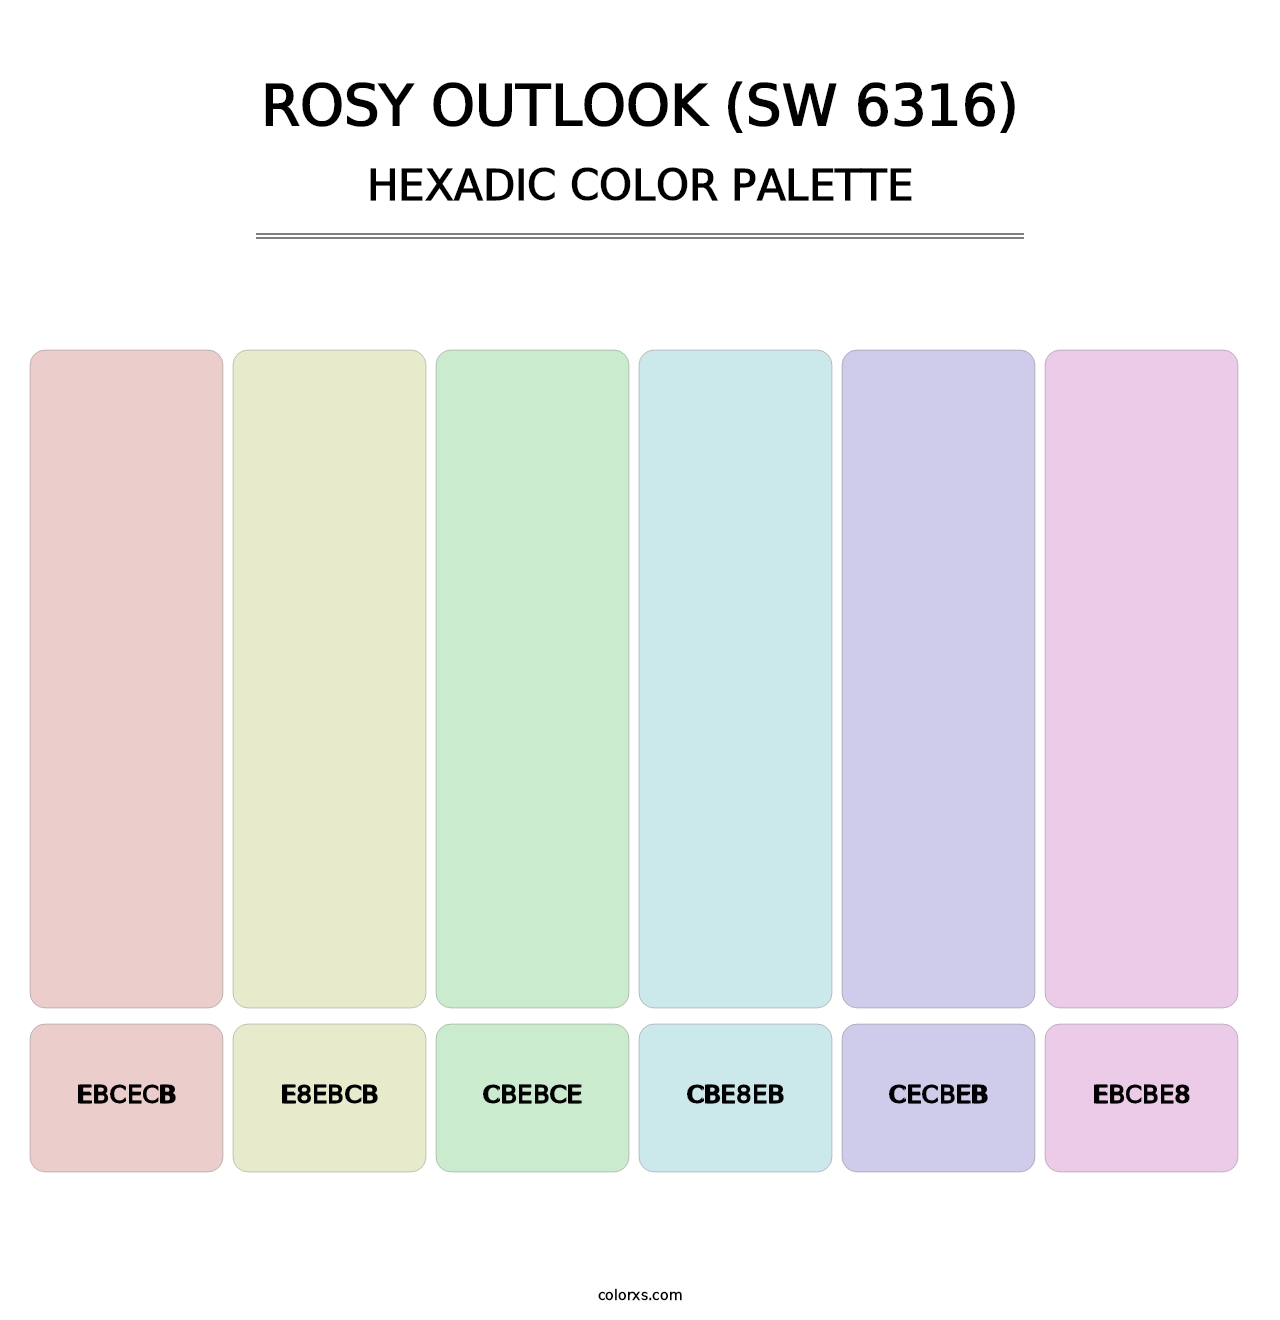 Rosy Outlook (SW 6316) - Hexadic Color Palette